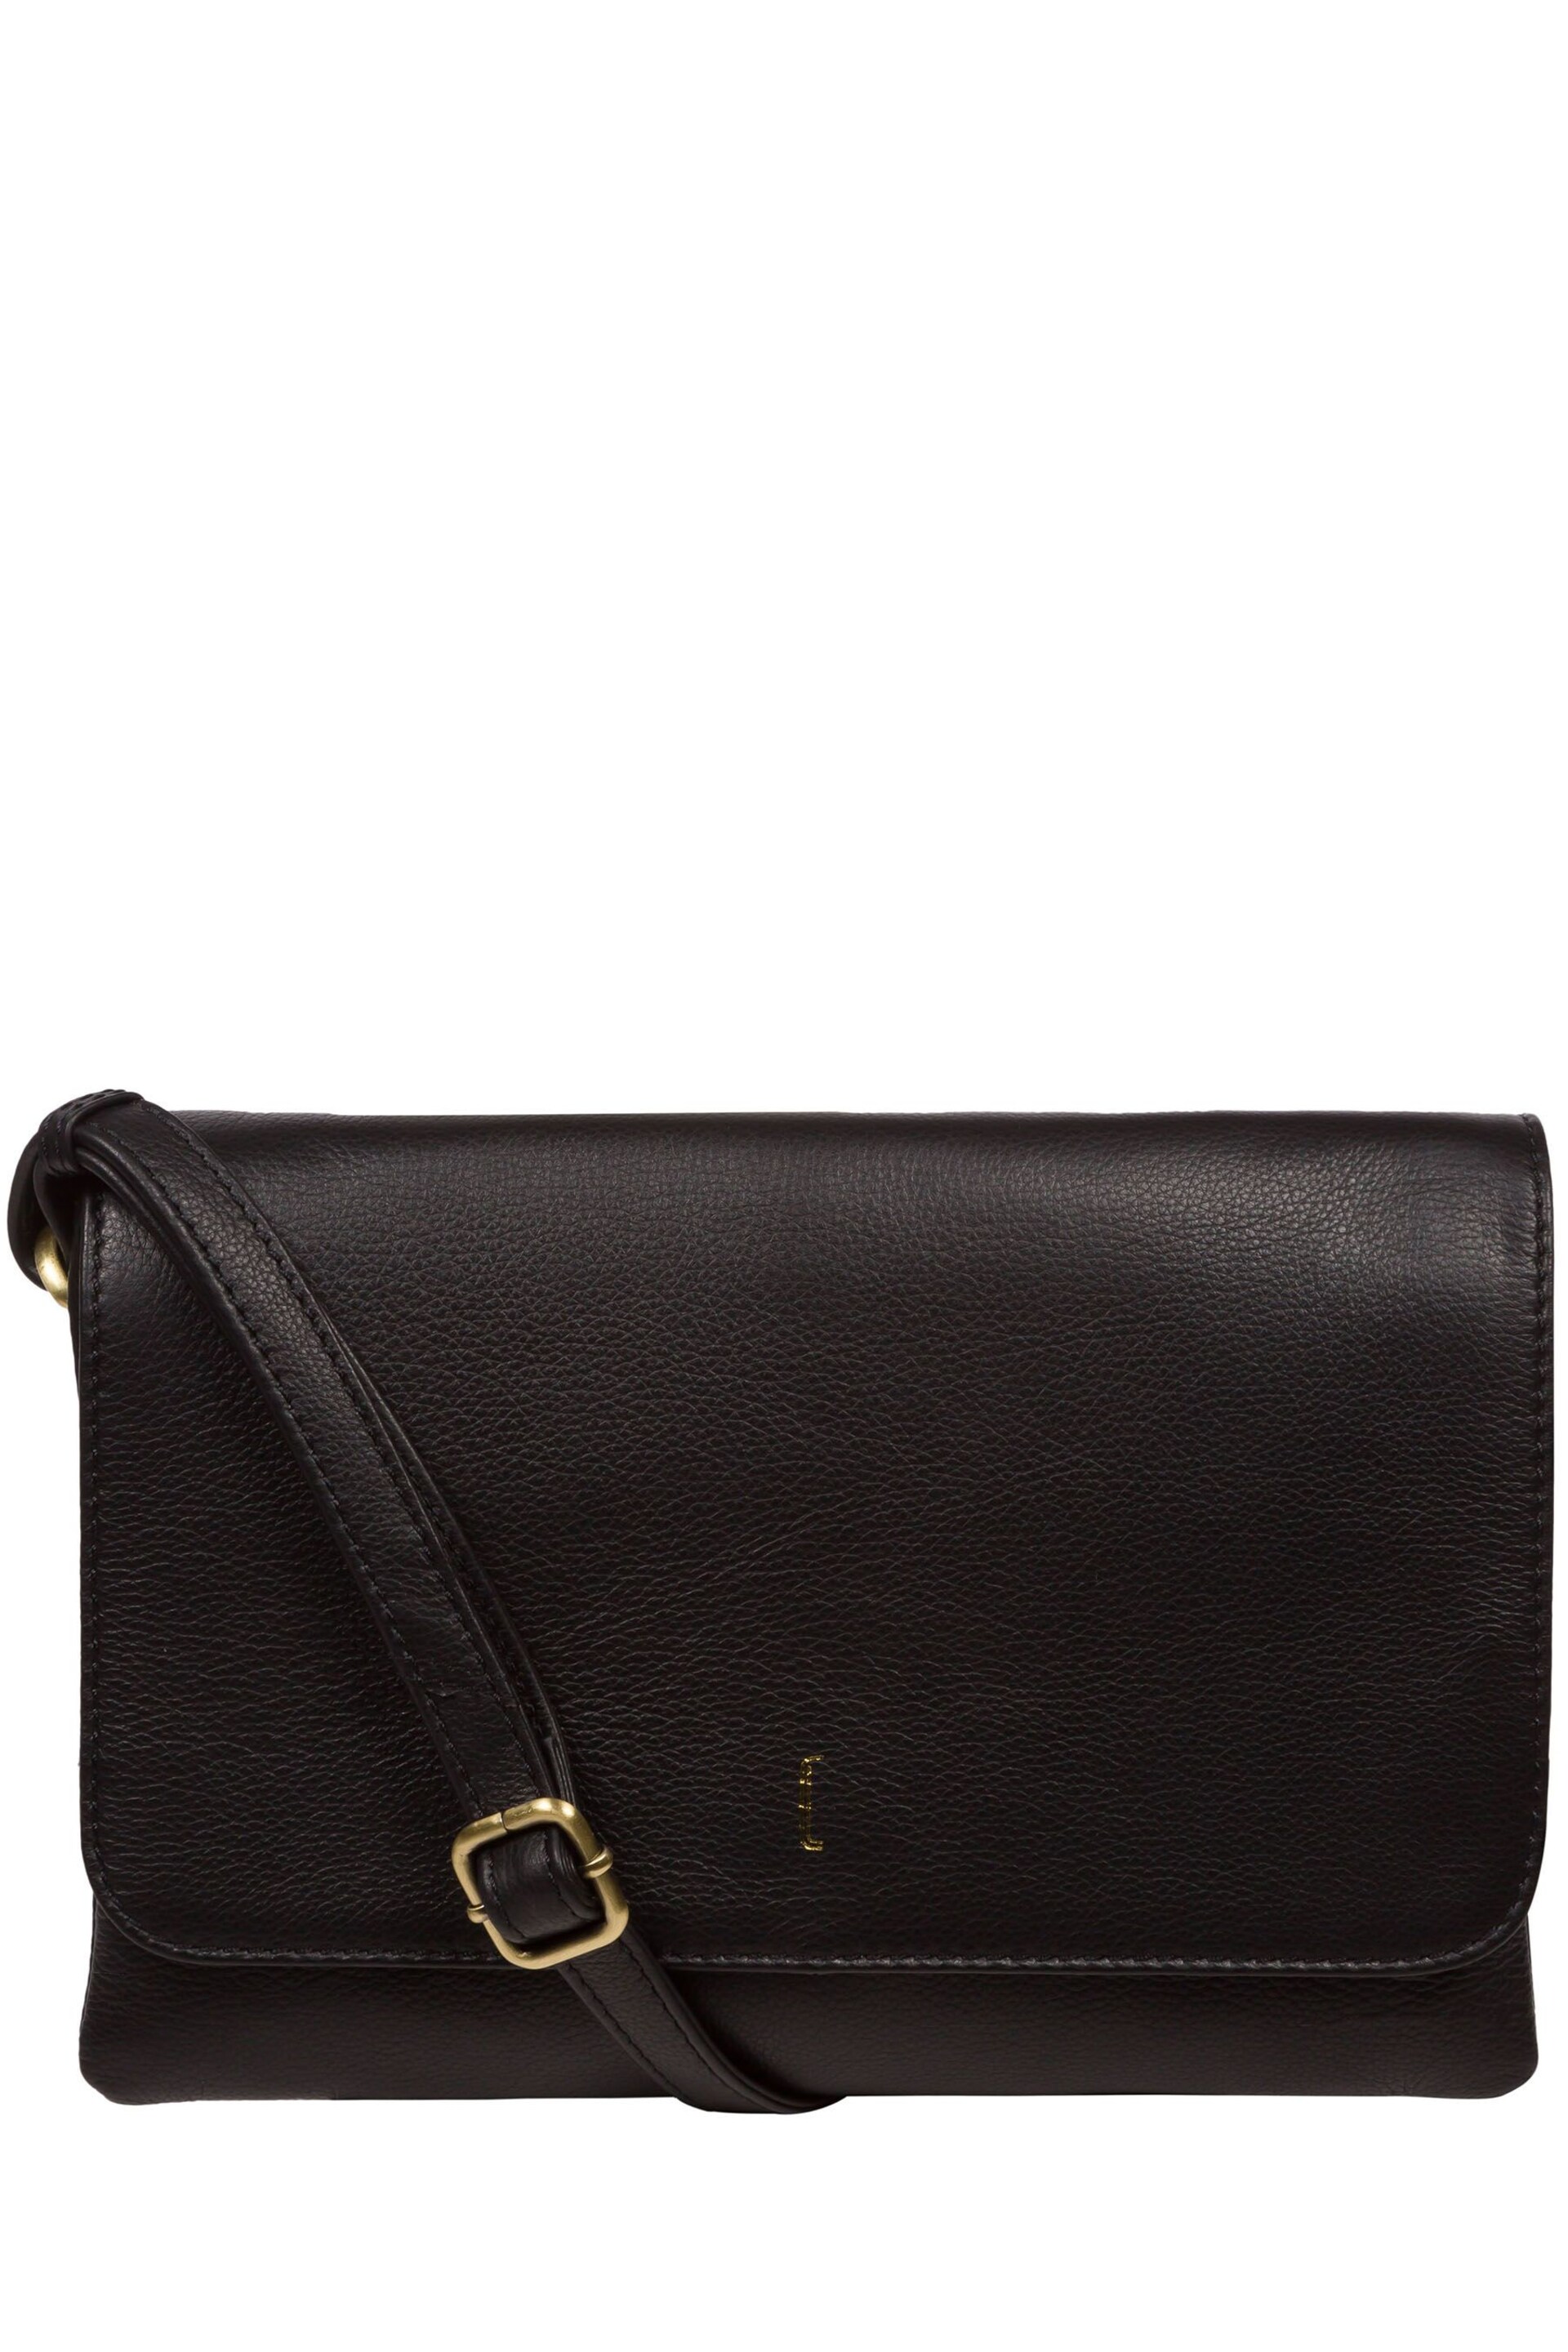 Cultured London Izzy Leather Cross Body Bag - Image 1 of 4